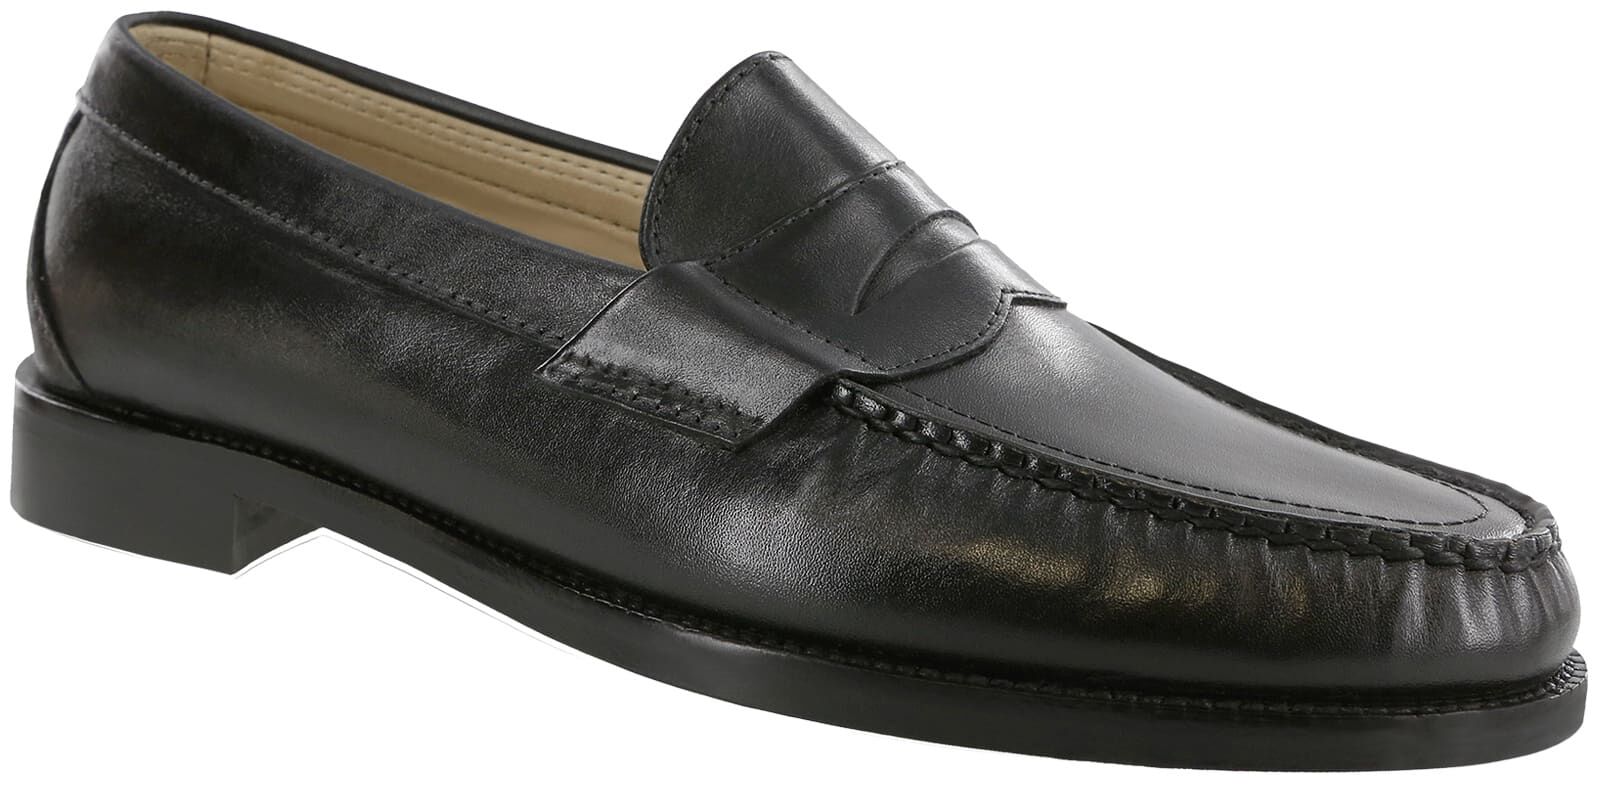 THE SEAN WOLF PENNY LOAFER - BLACK OFF WHITE – THEWOLF